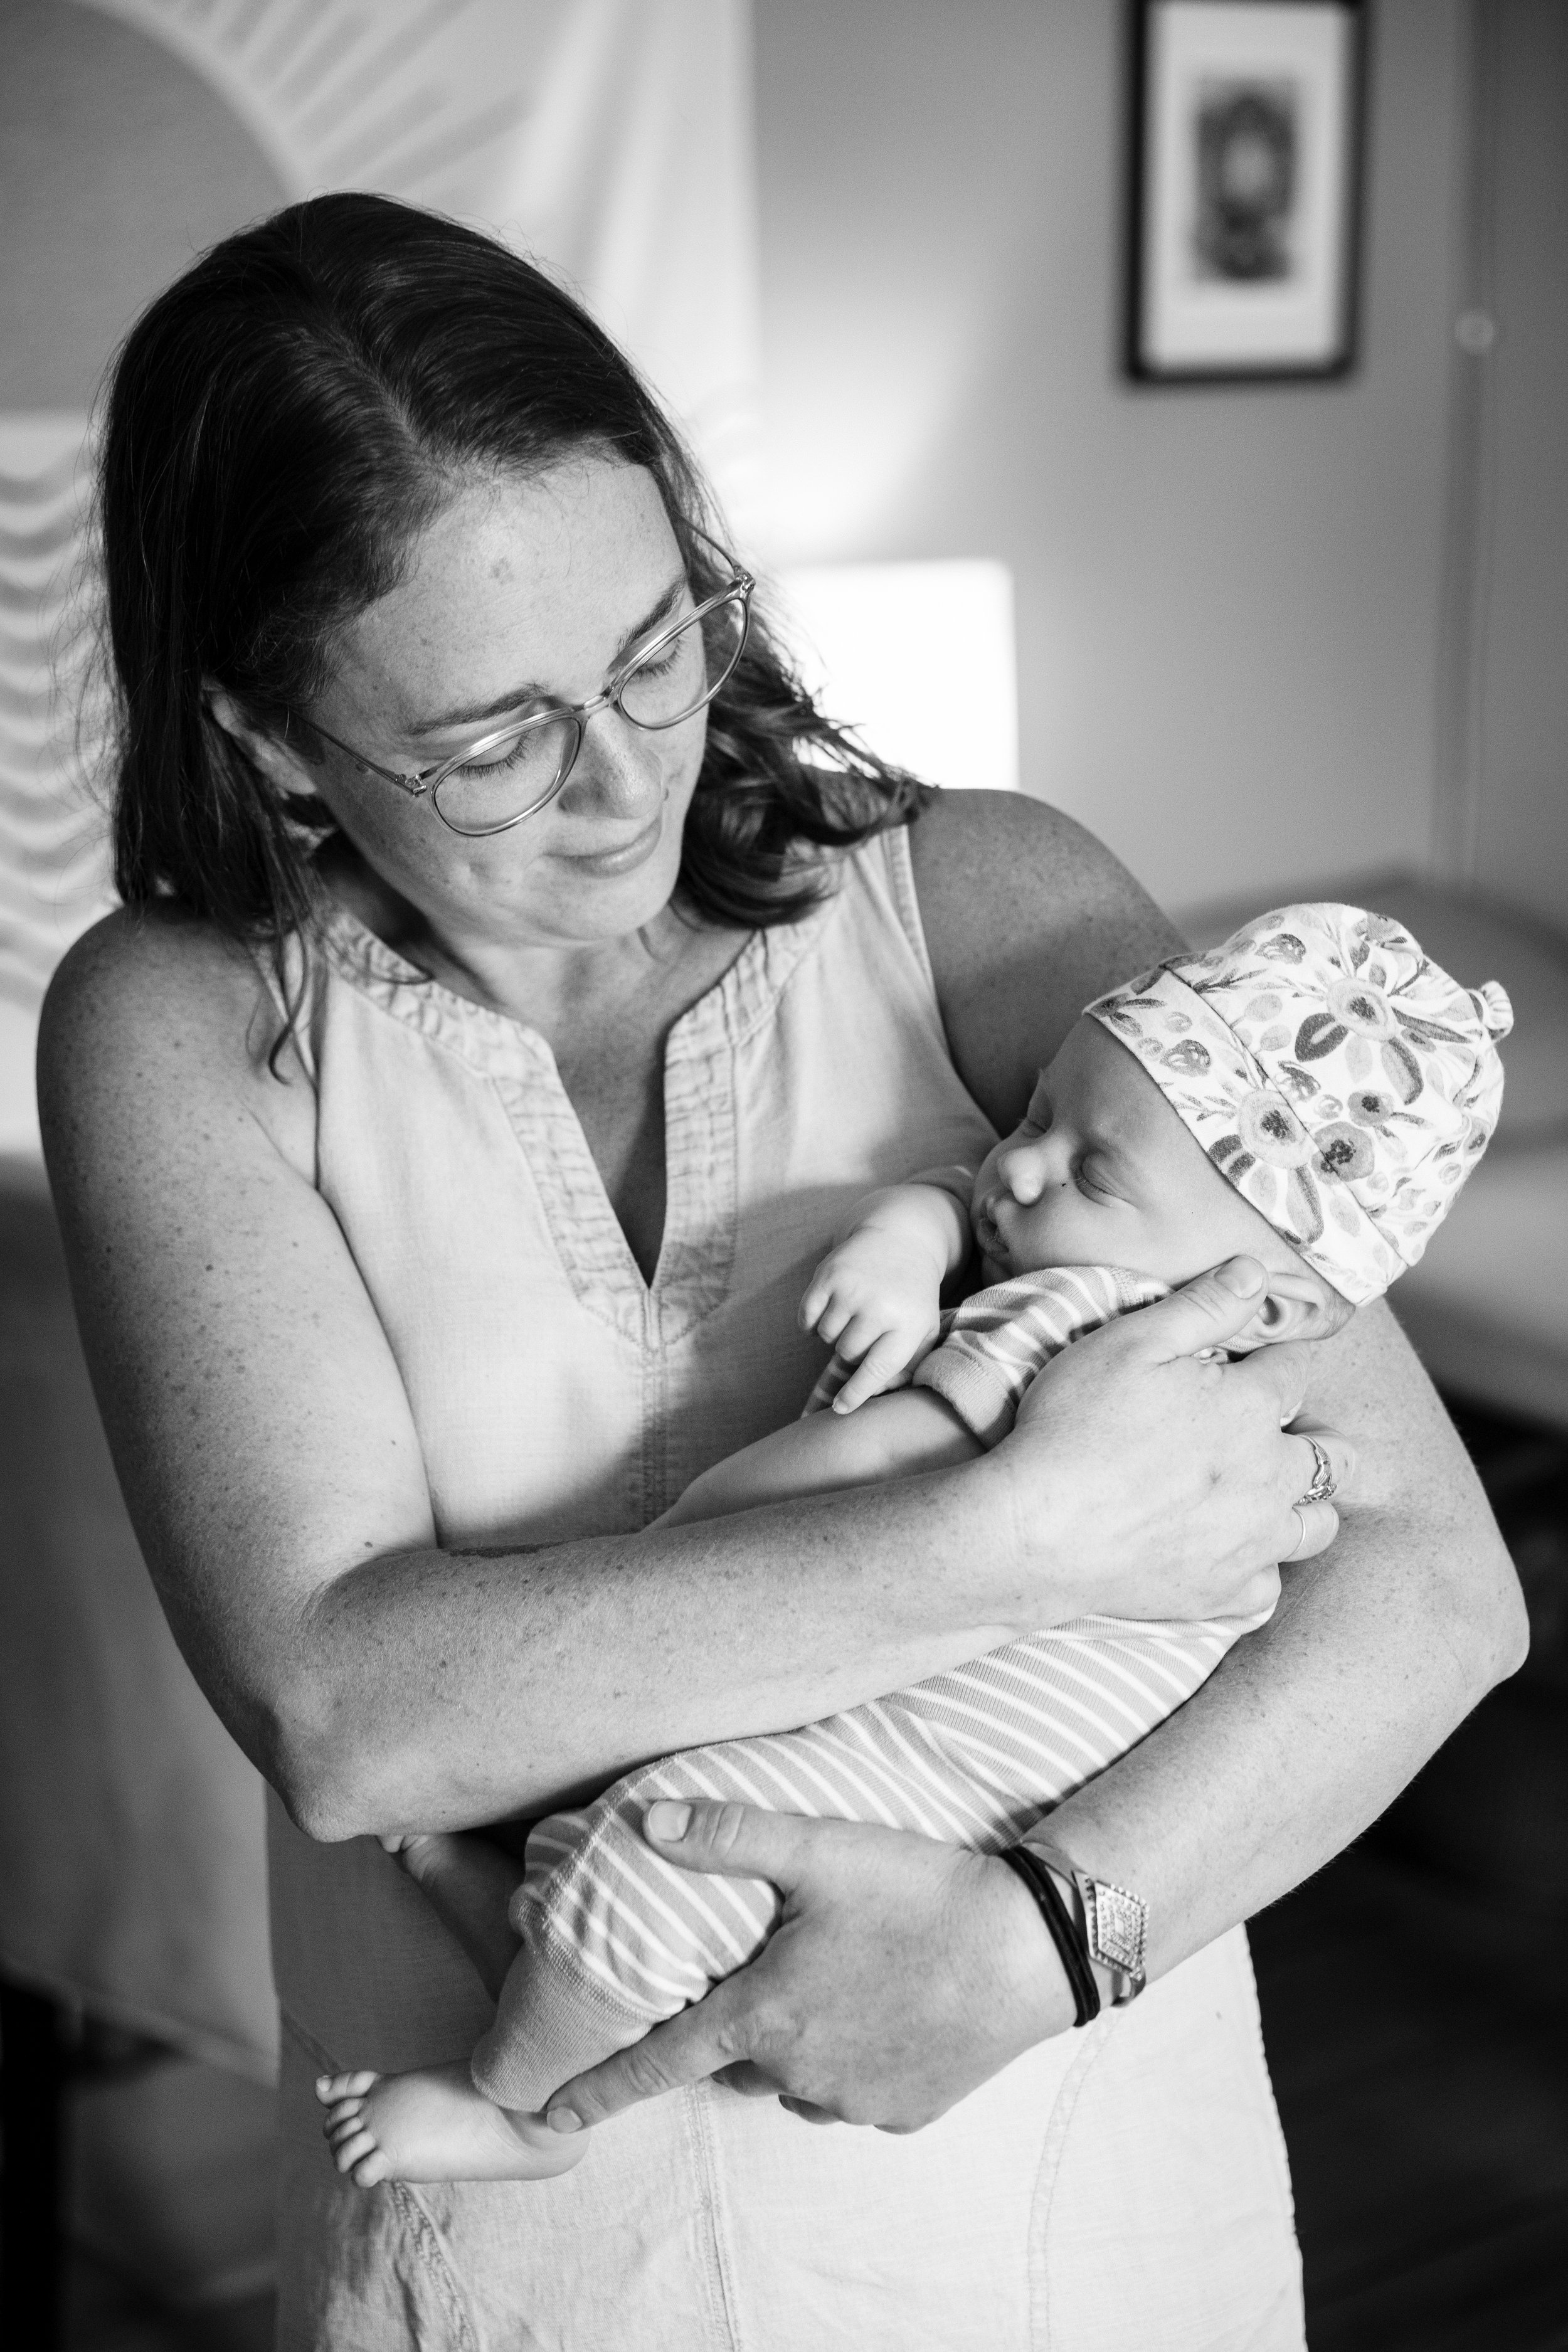  “Alison and Heidi are extremely competent, knowledgeable, empathetic, and intuitive caregivers and midwives.  Both Alison &amp; Heidi's calm presence made the birth of our second baby such a peaceful welcome to the world and allowed our family the b